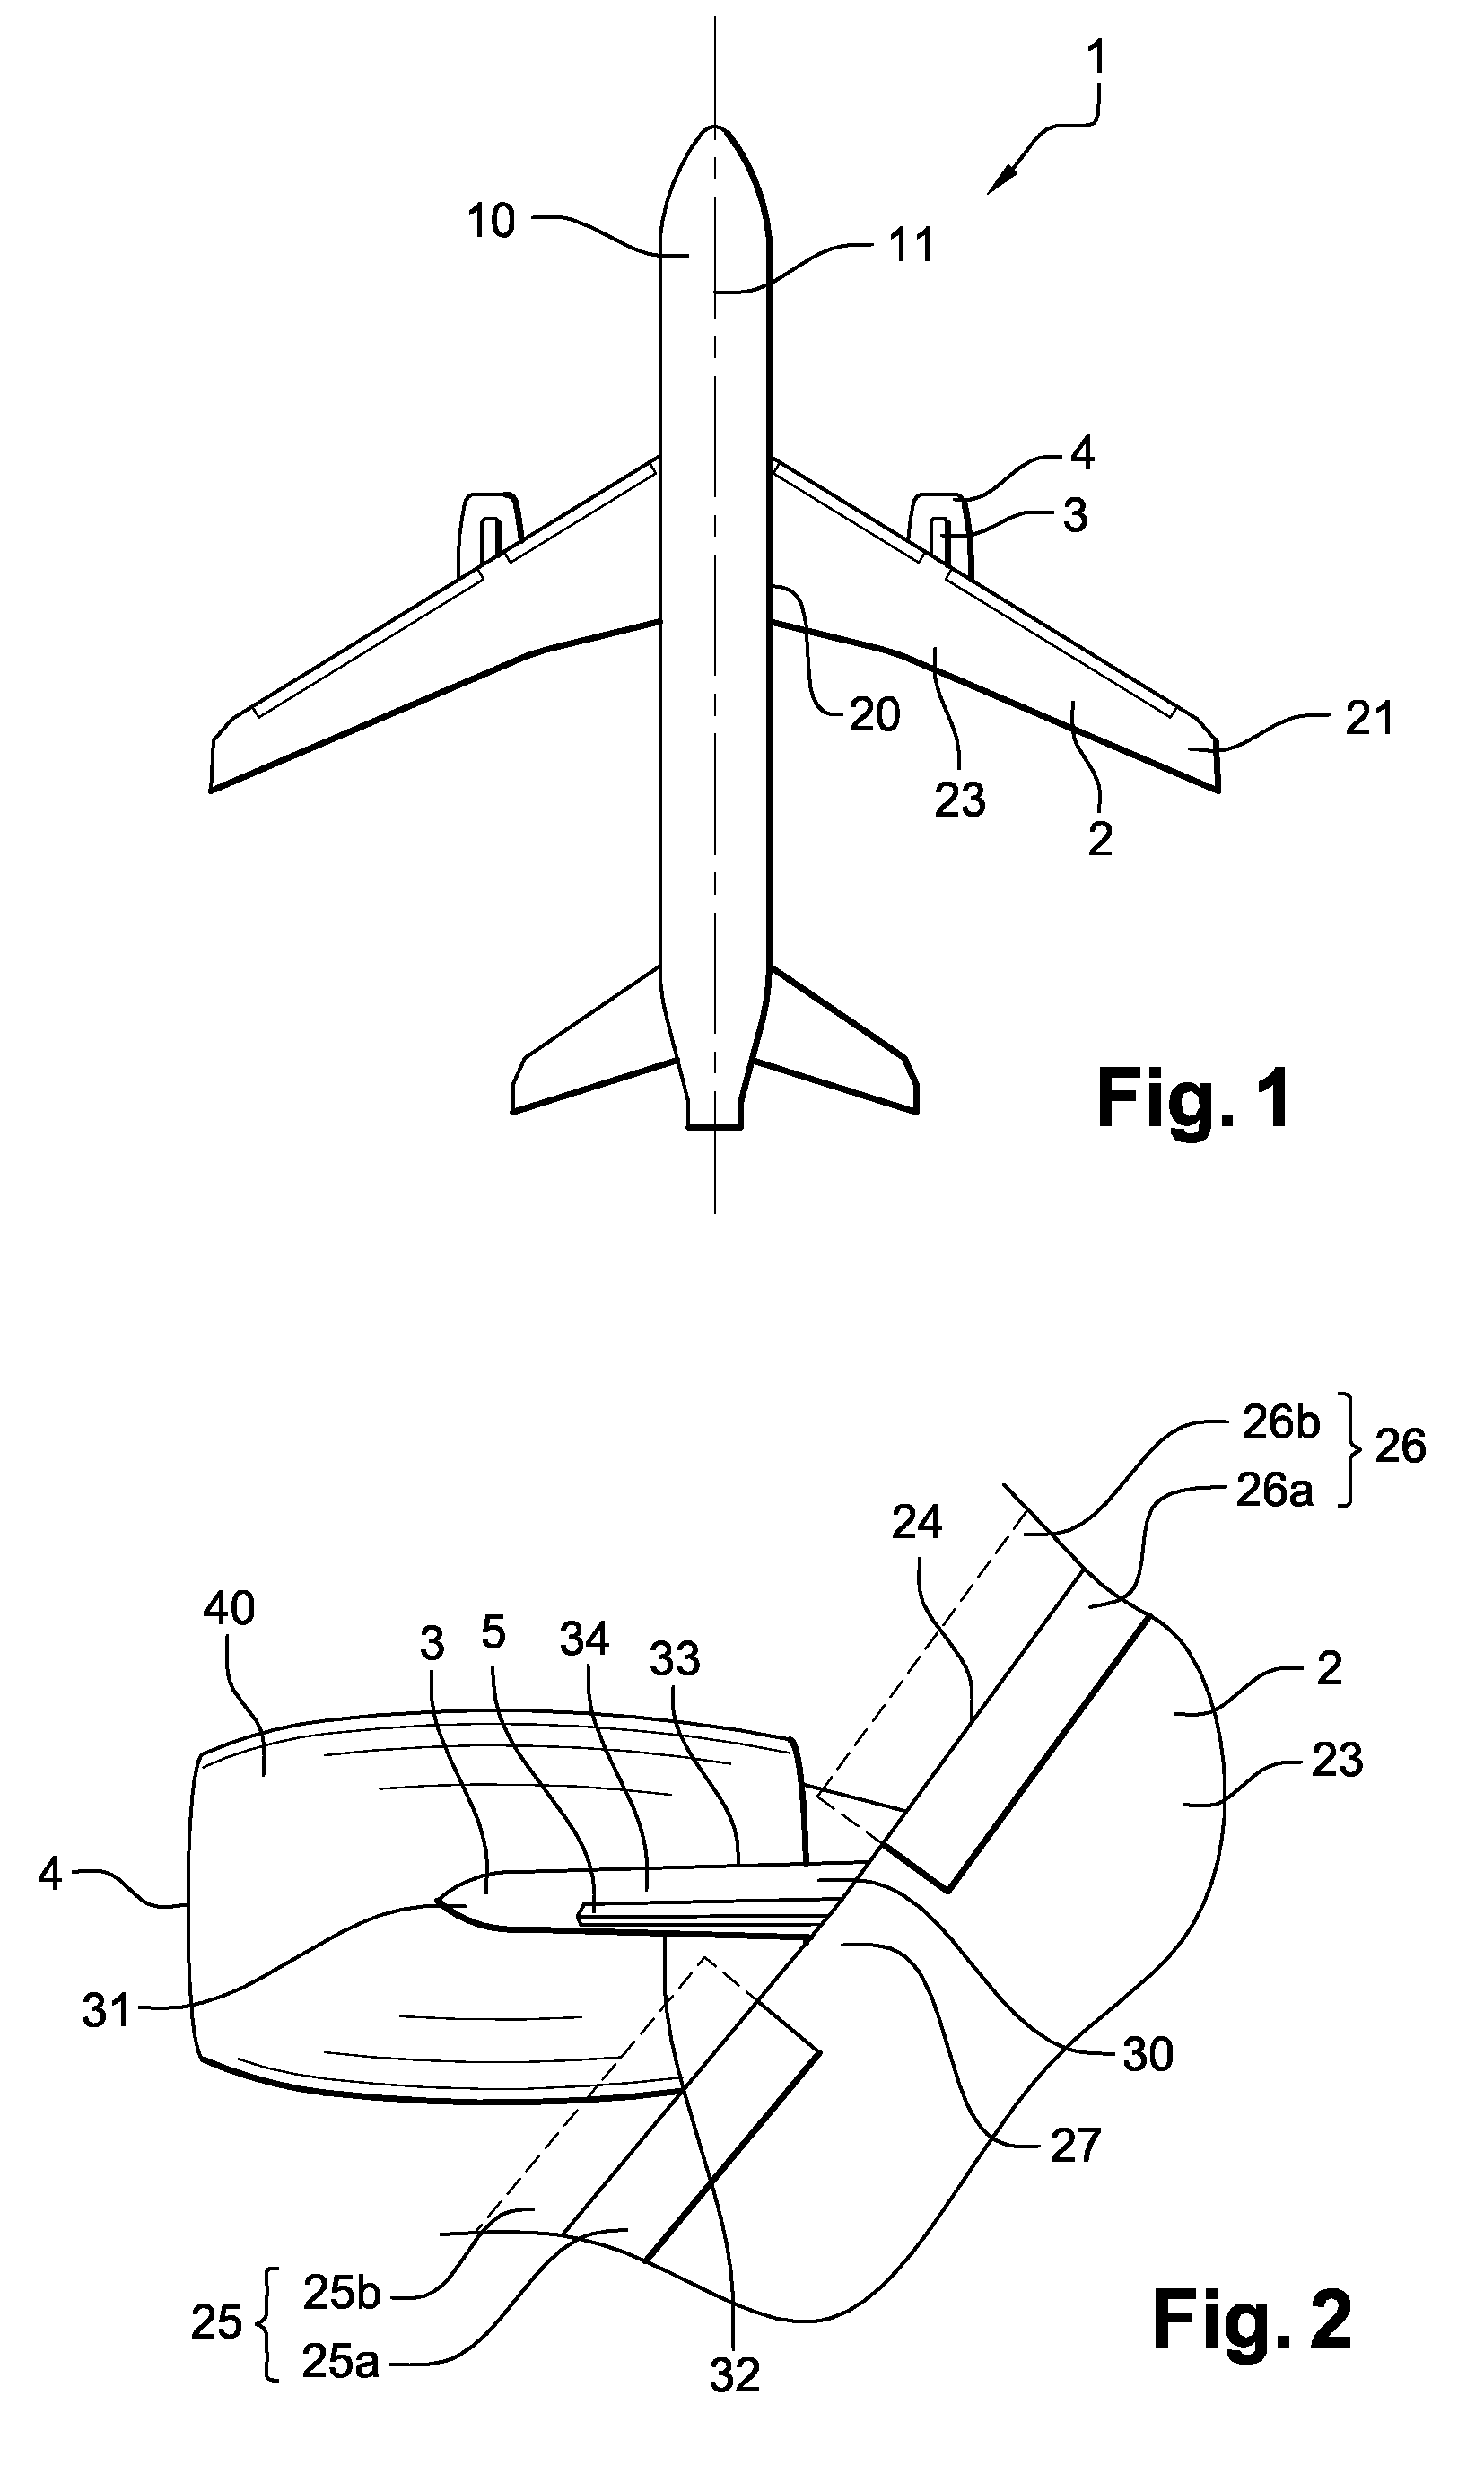 Airplane engine pylon comprising at least one protruding element to generate a vortex of the airflow